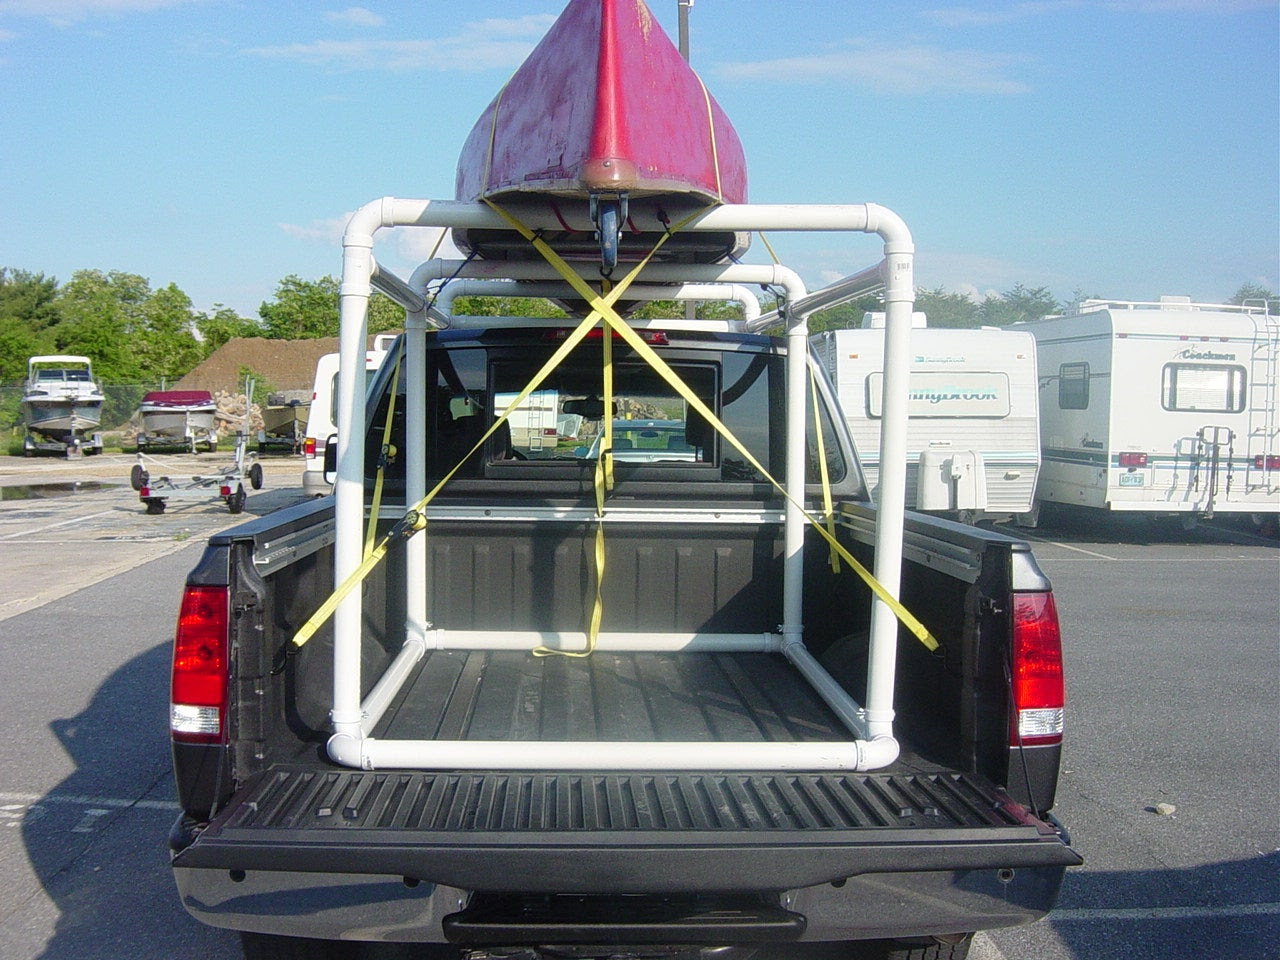 Build your own canoe rack small truck